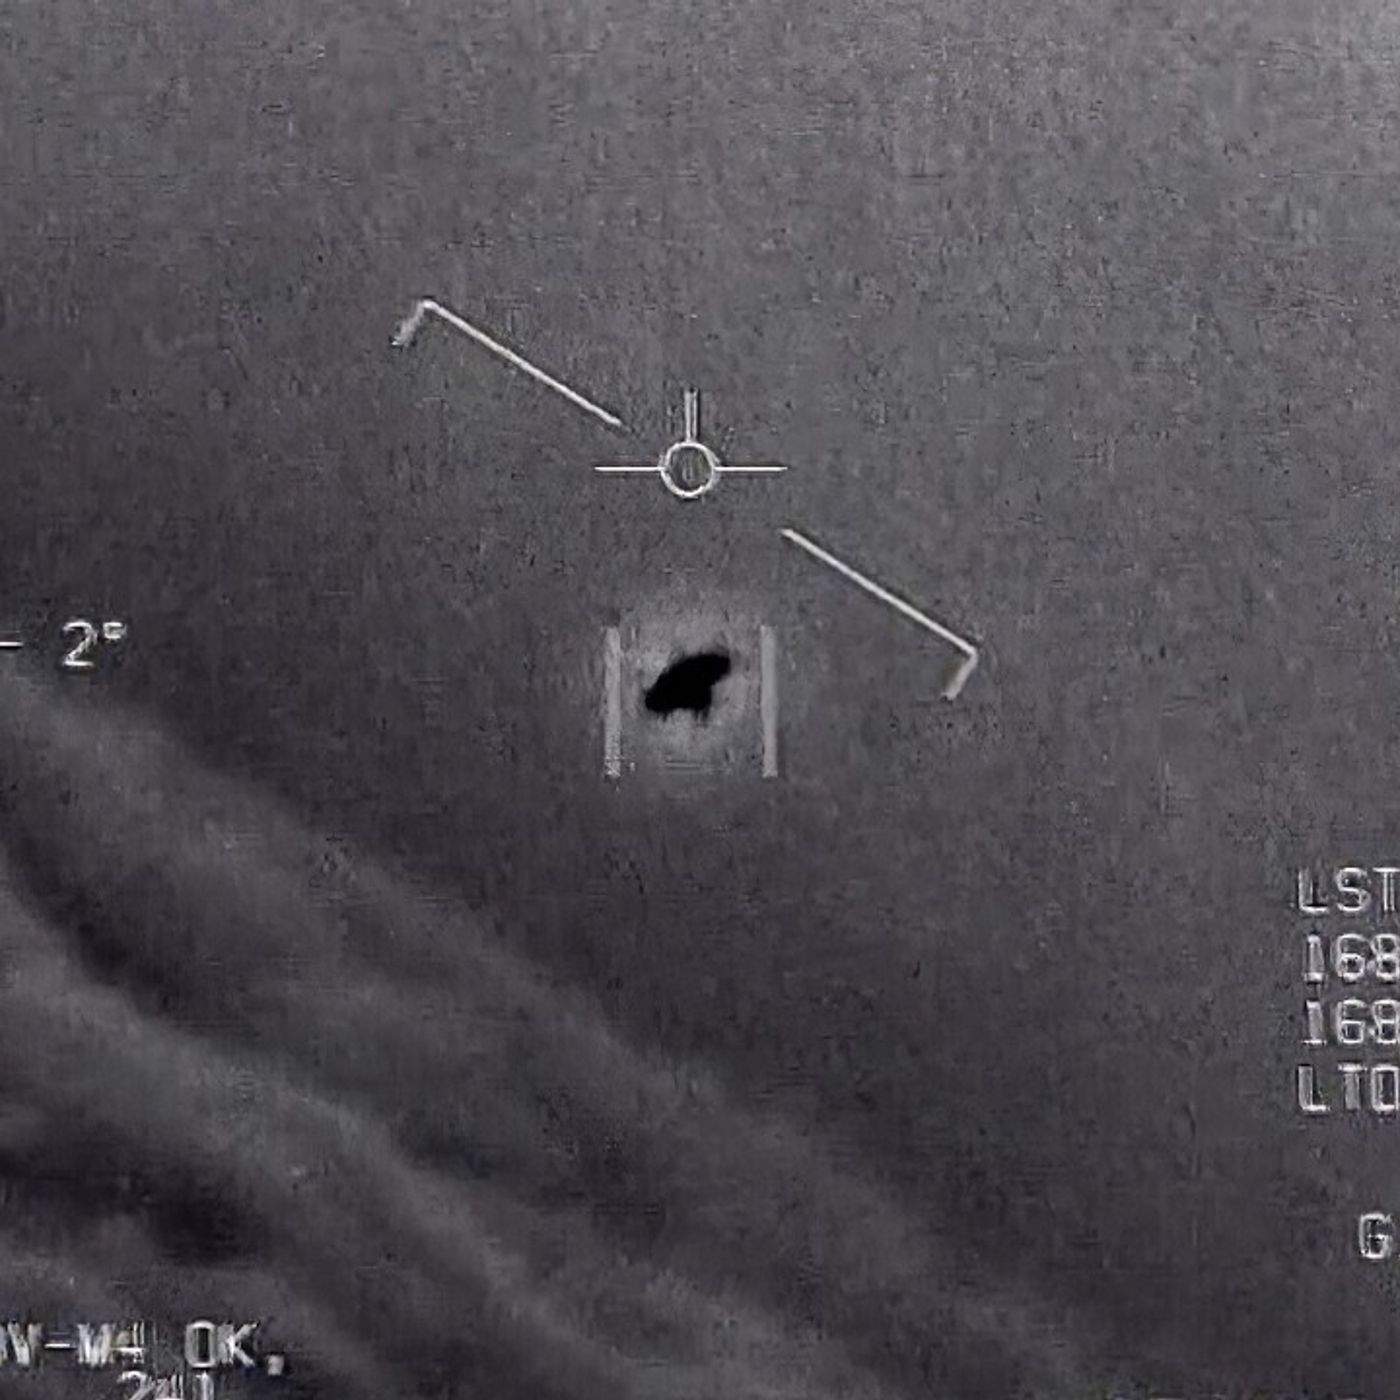 UFOs – is the truth out there?